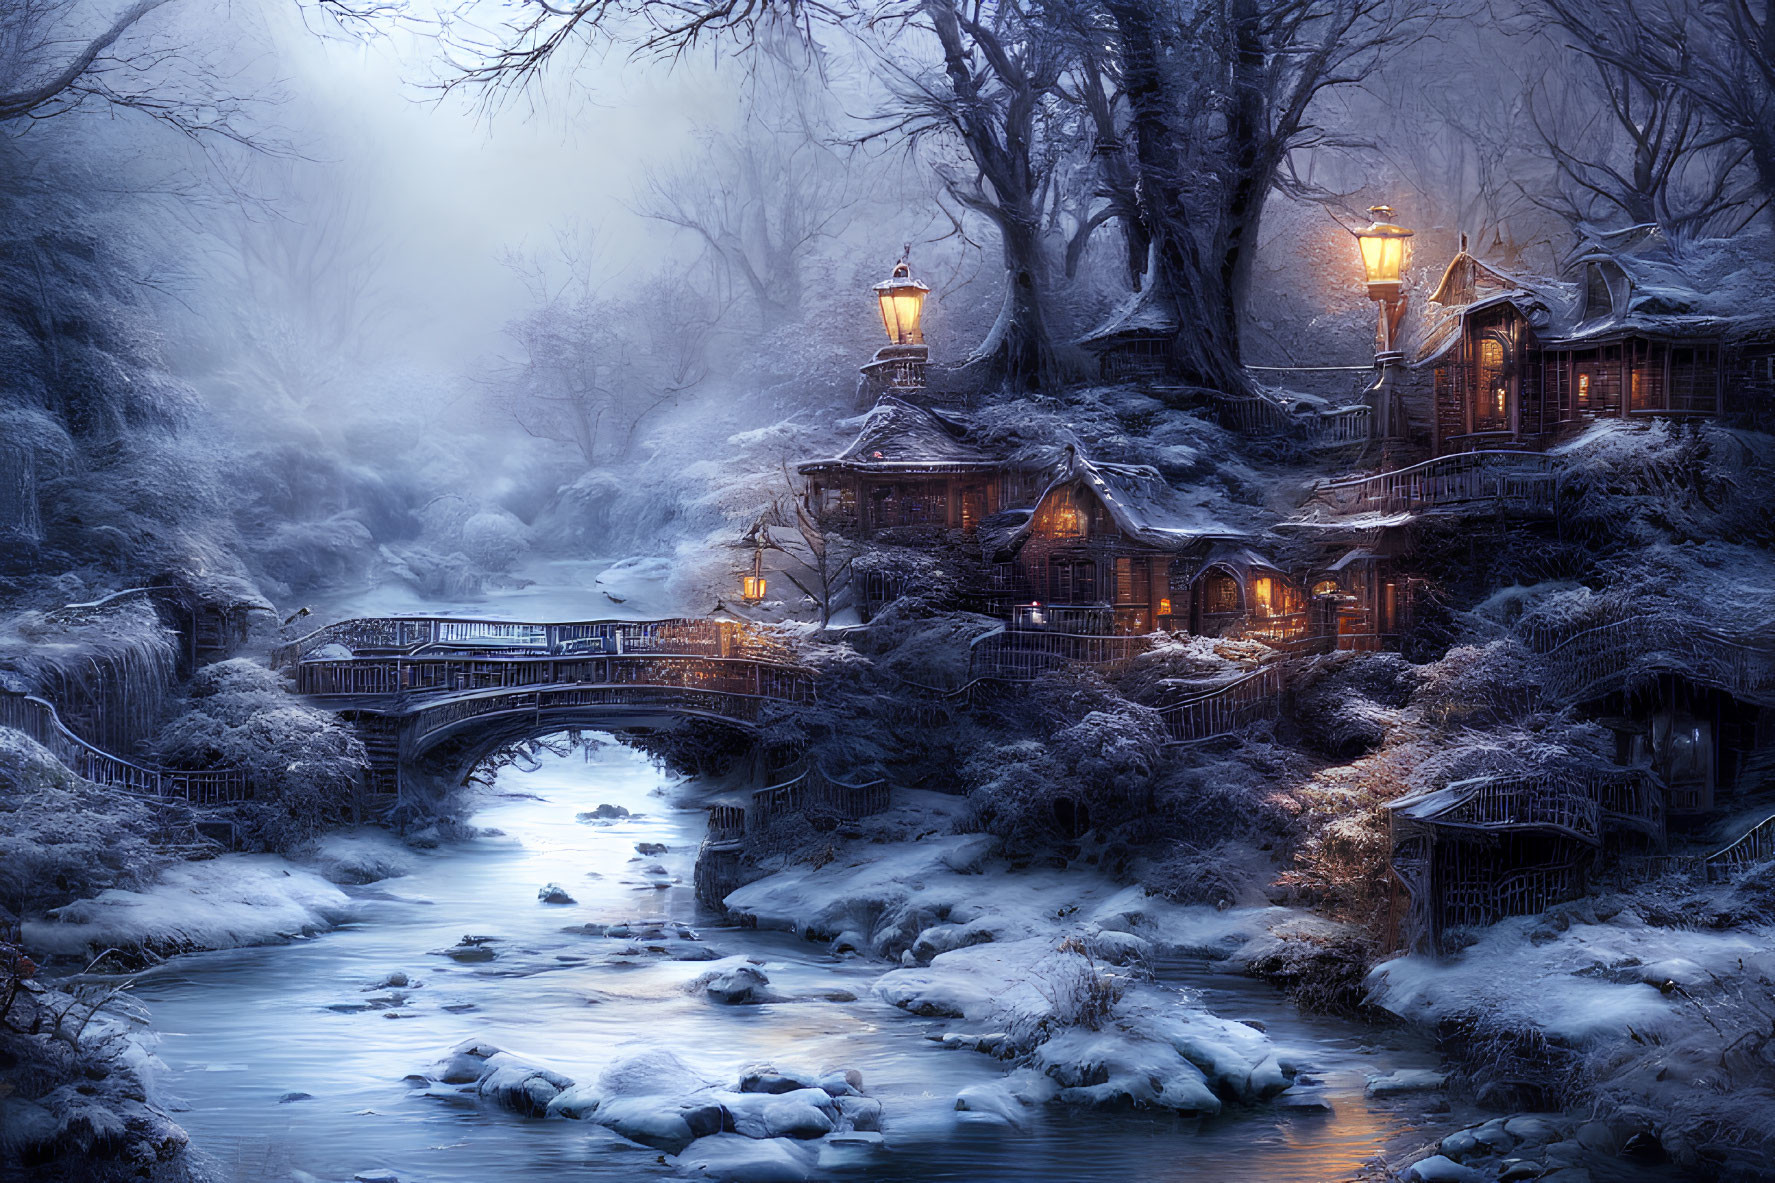 Snow-covered trees, bridge, and cozy houses in enchanting winter scene